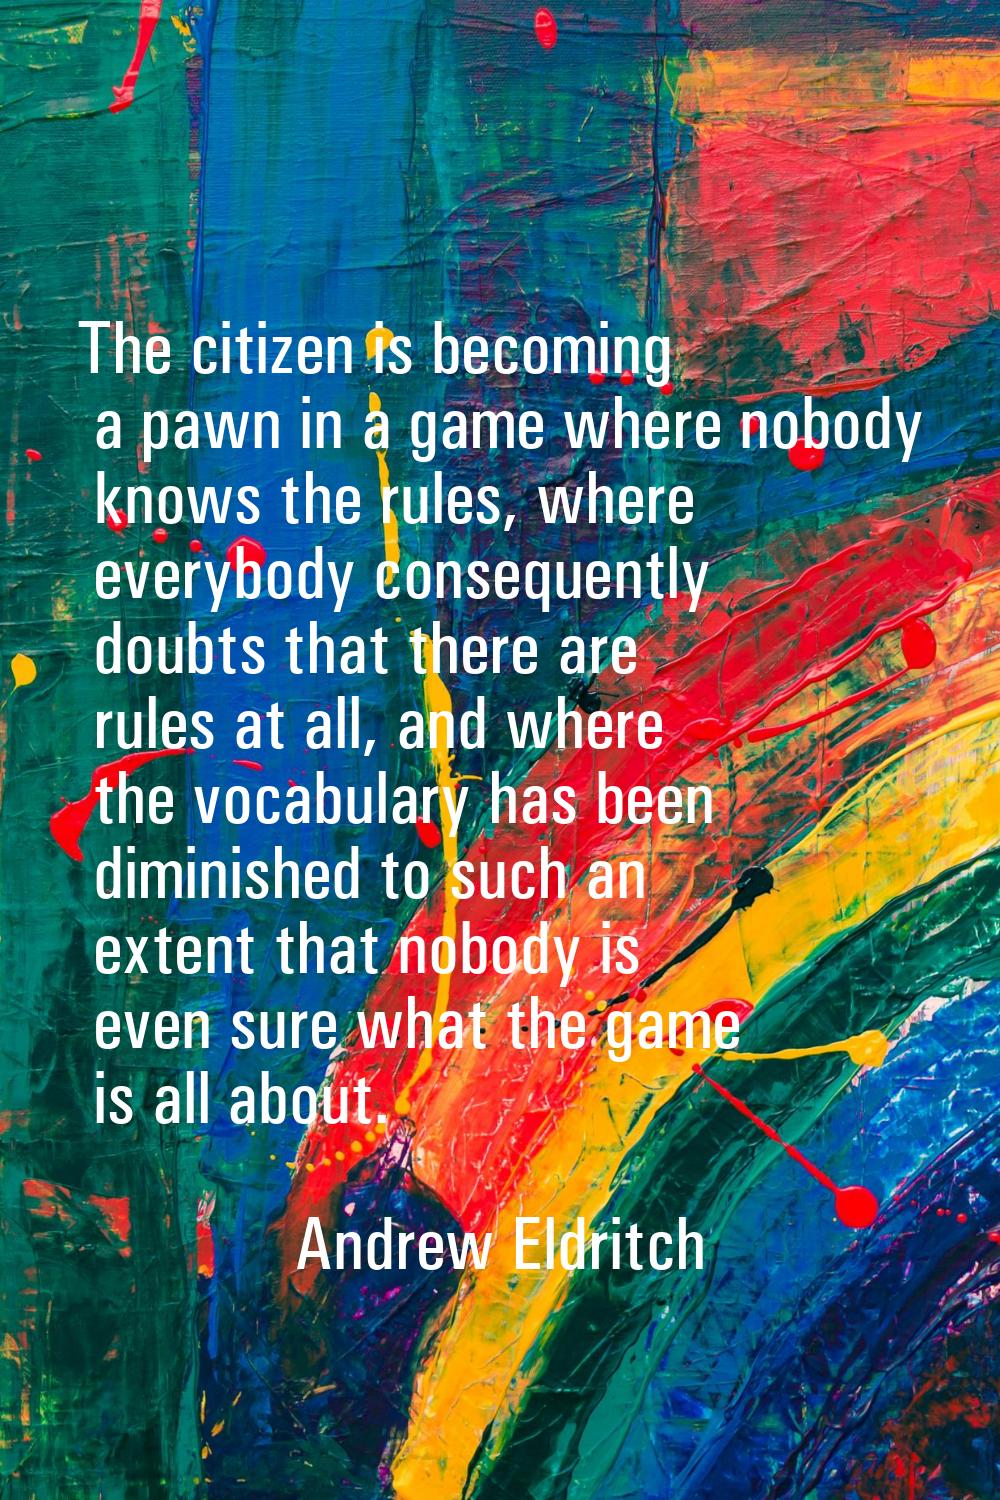 The citizen is becoming a pawn in a game where nobody knows the rules, where everybody consequently